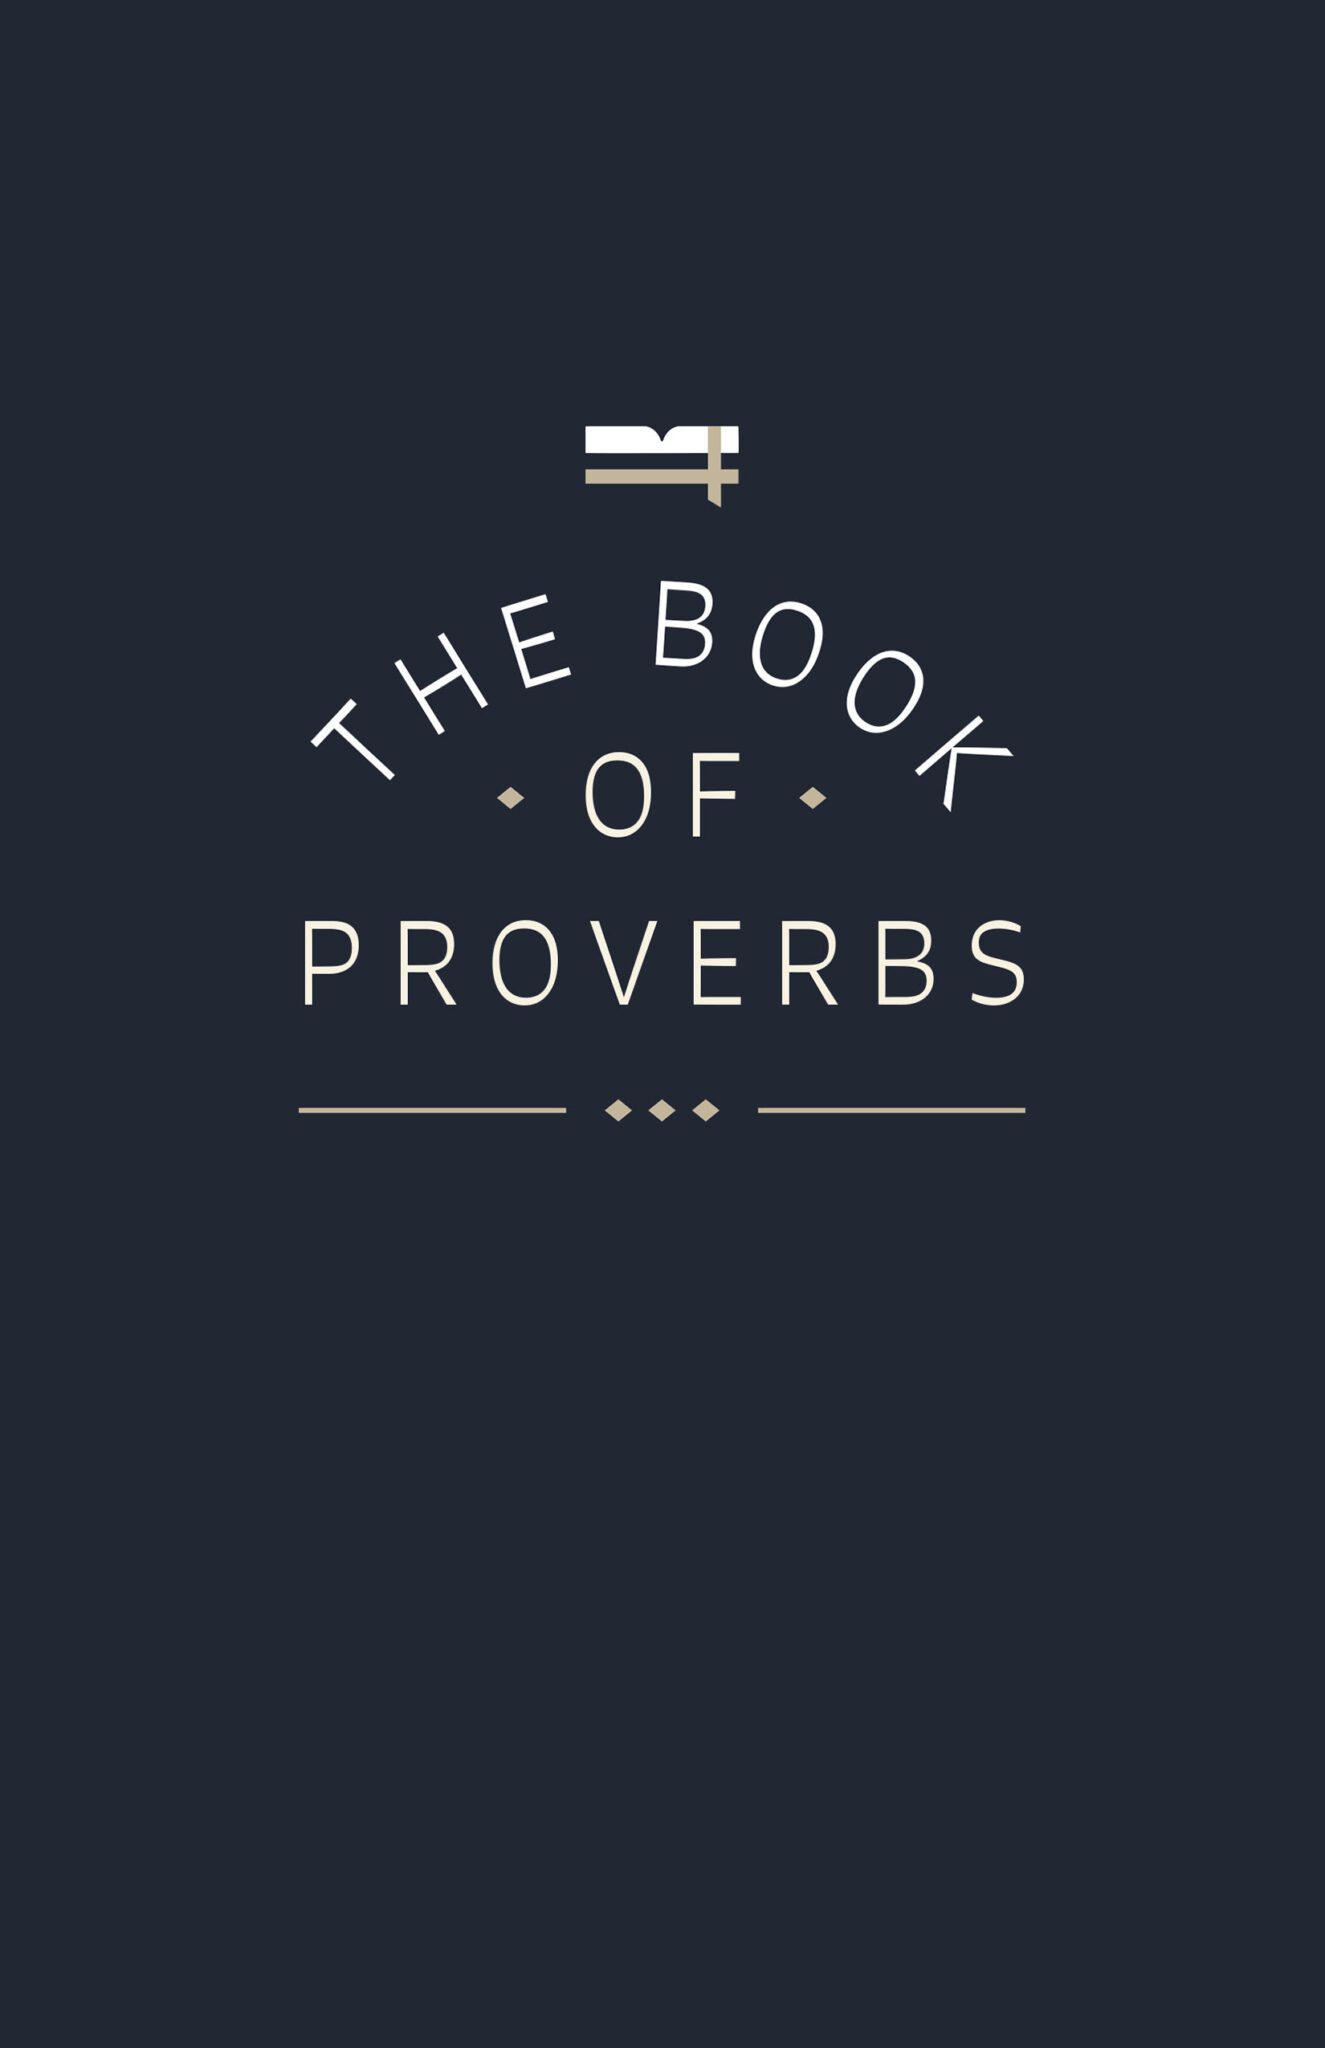 The Book of Proverbs: Four Animals of Wisdom